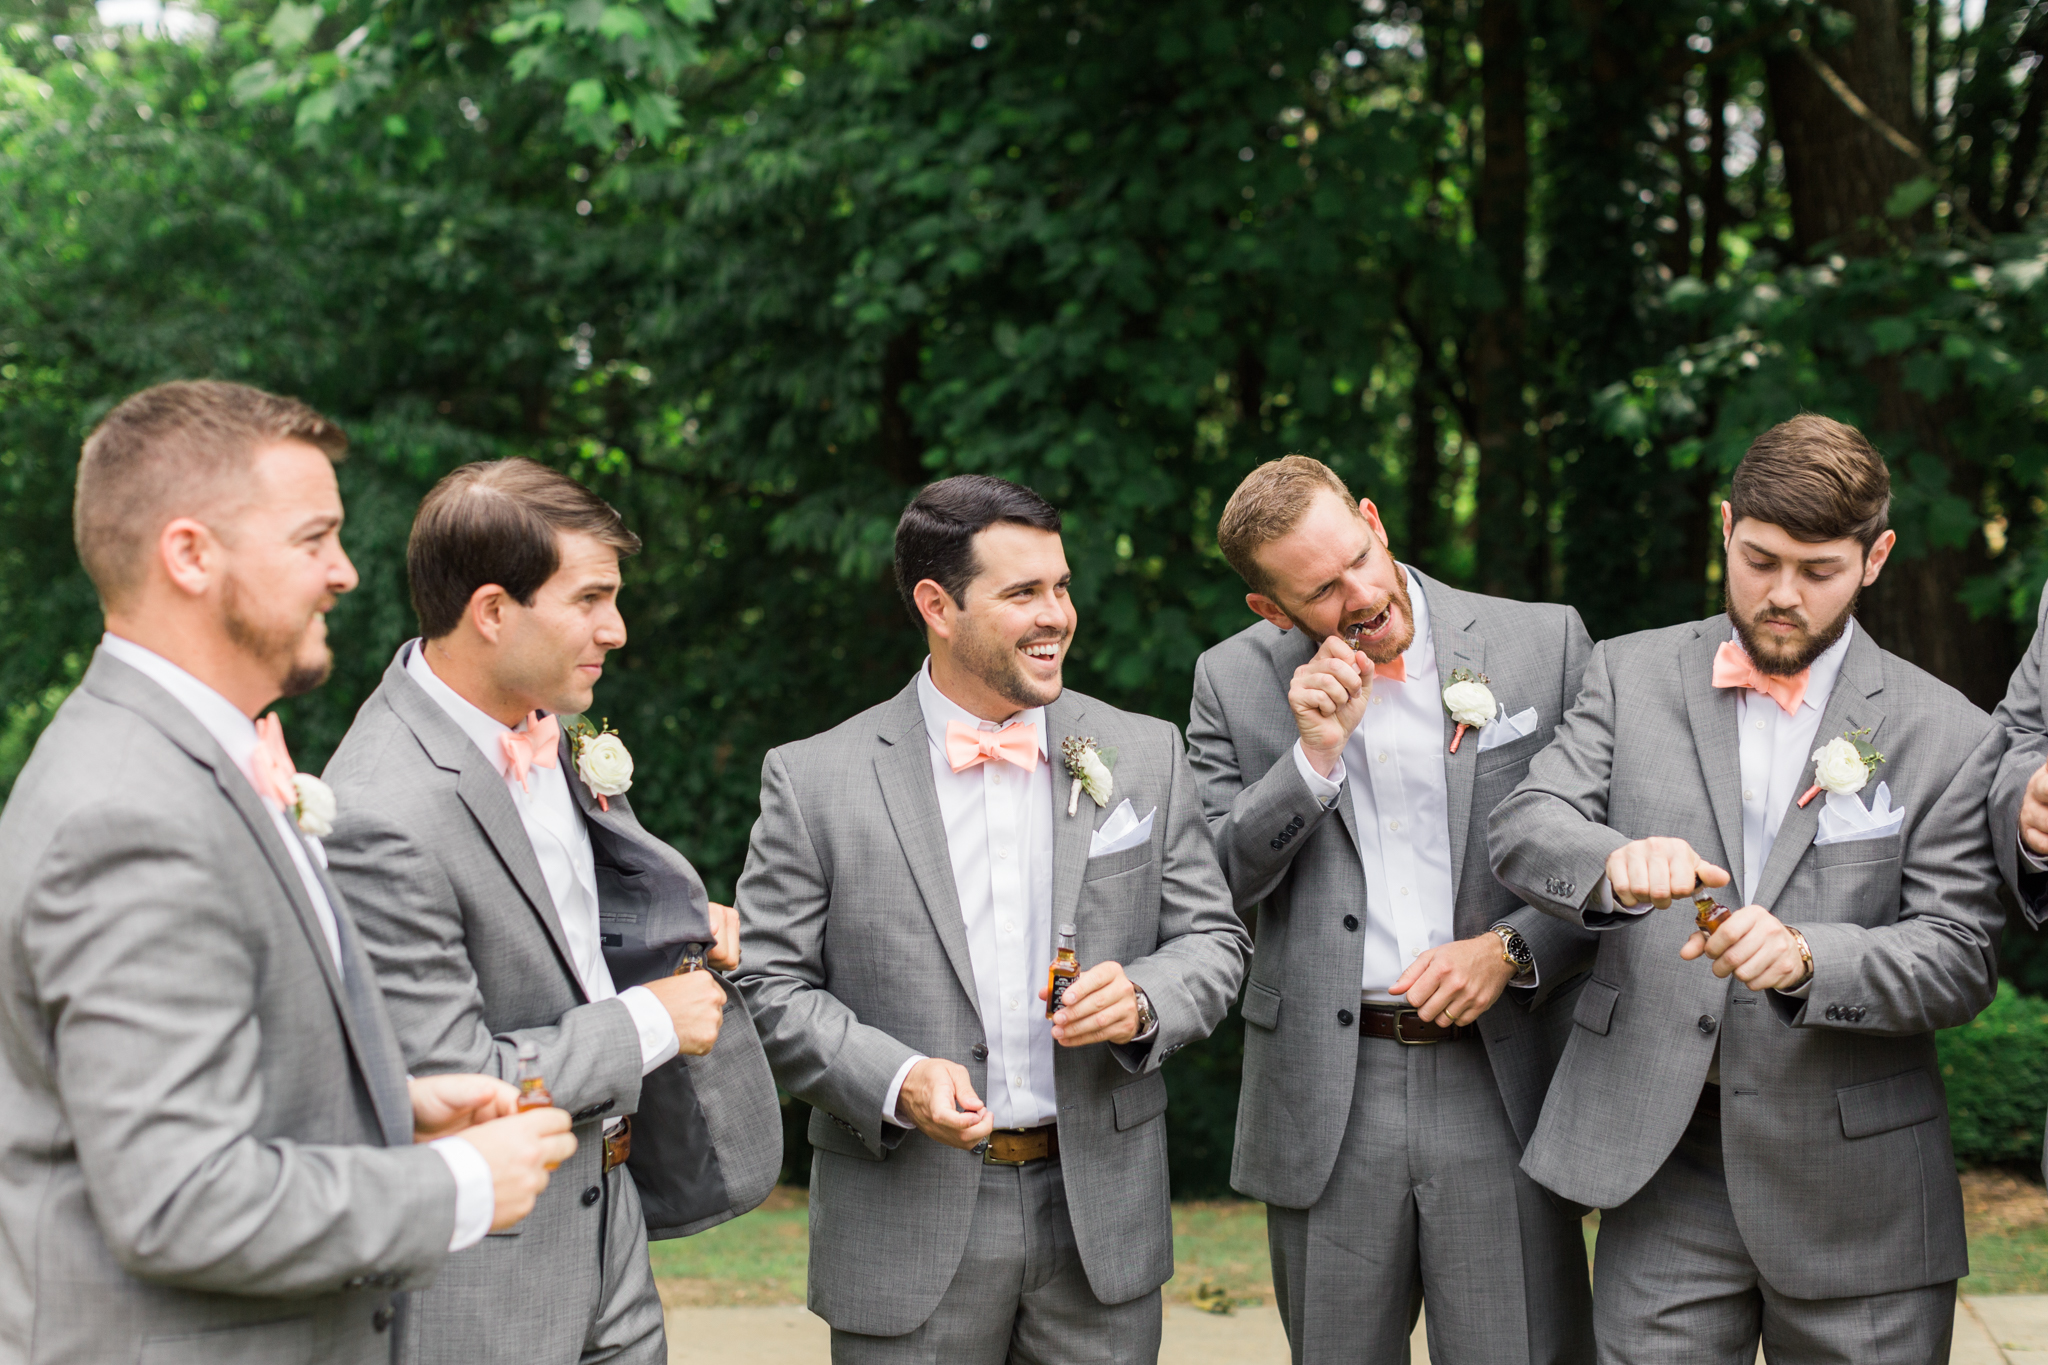 These groomsmen had just the trick to settle pre-ceremony jitters!